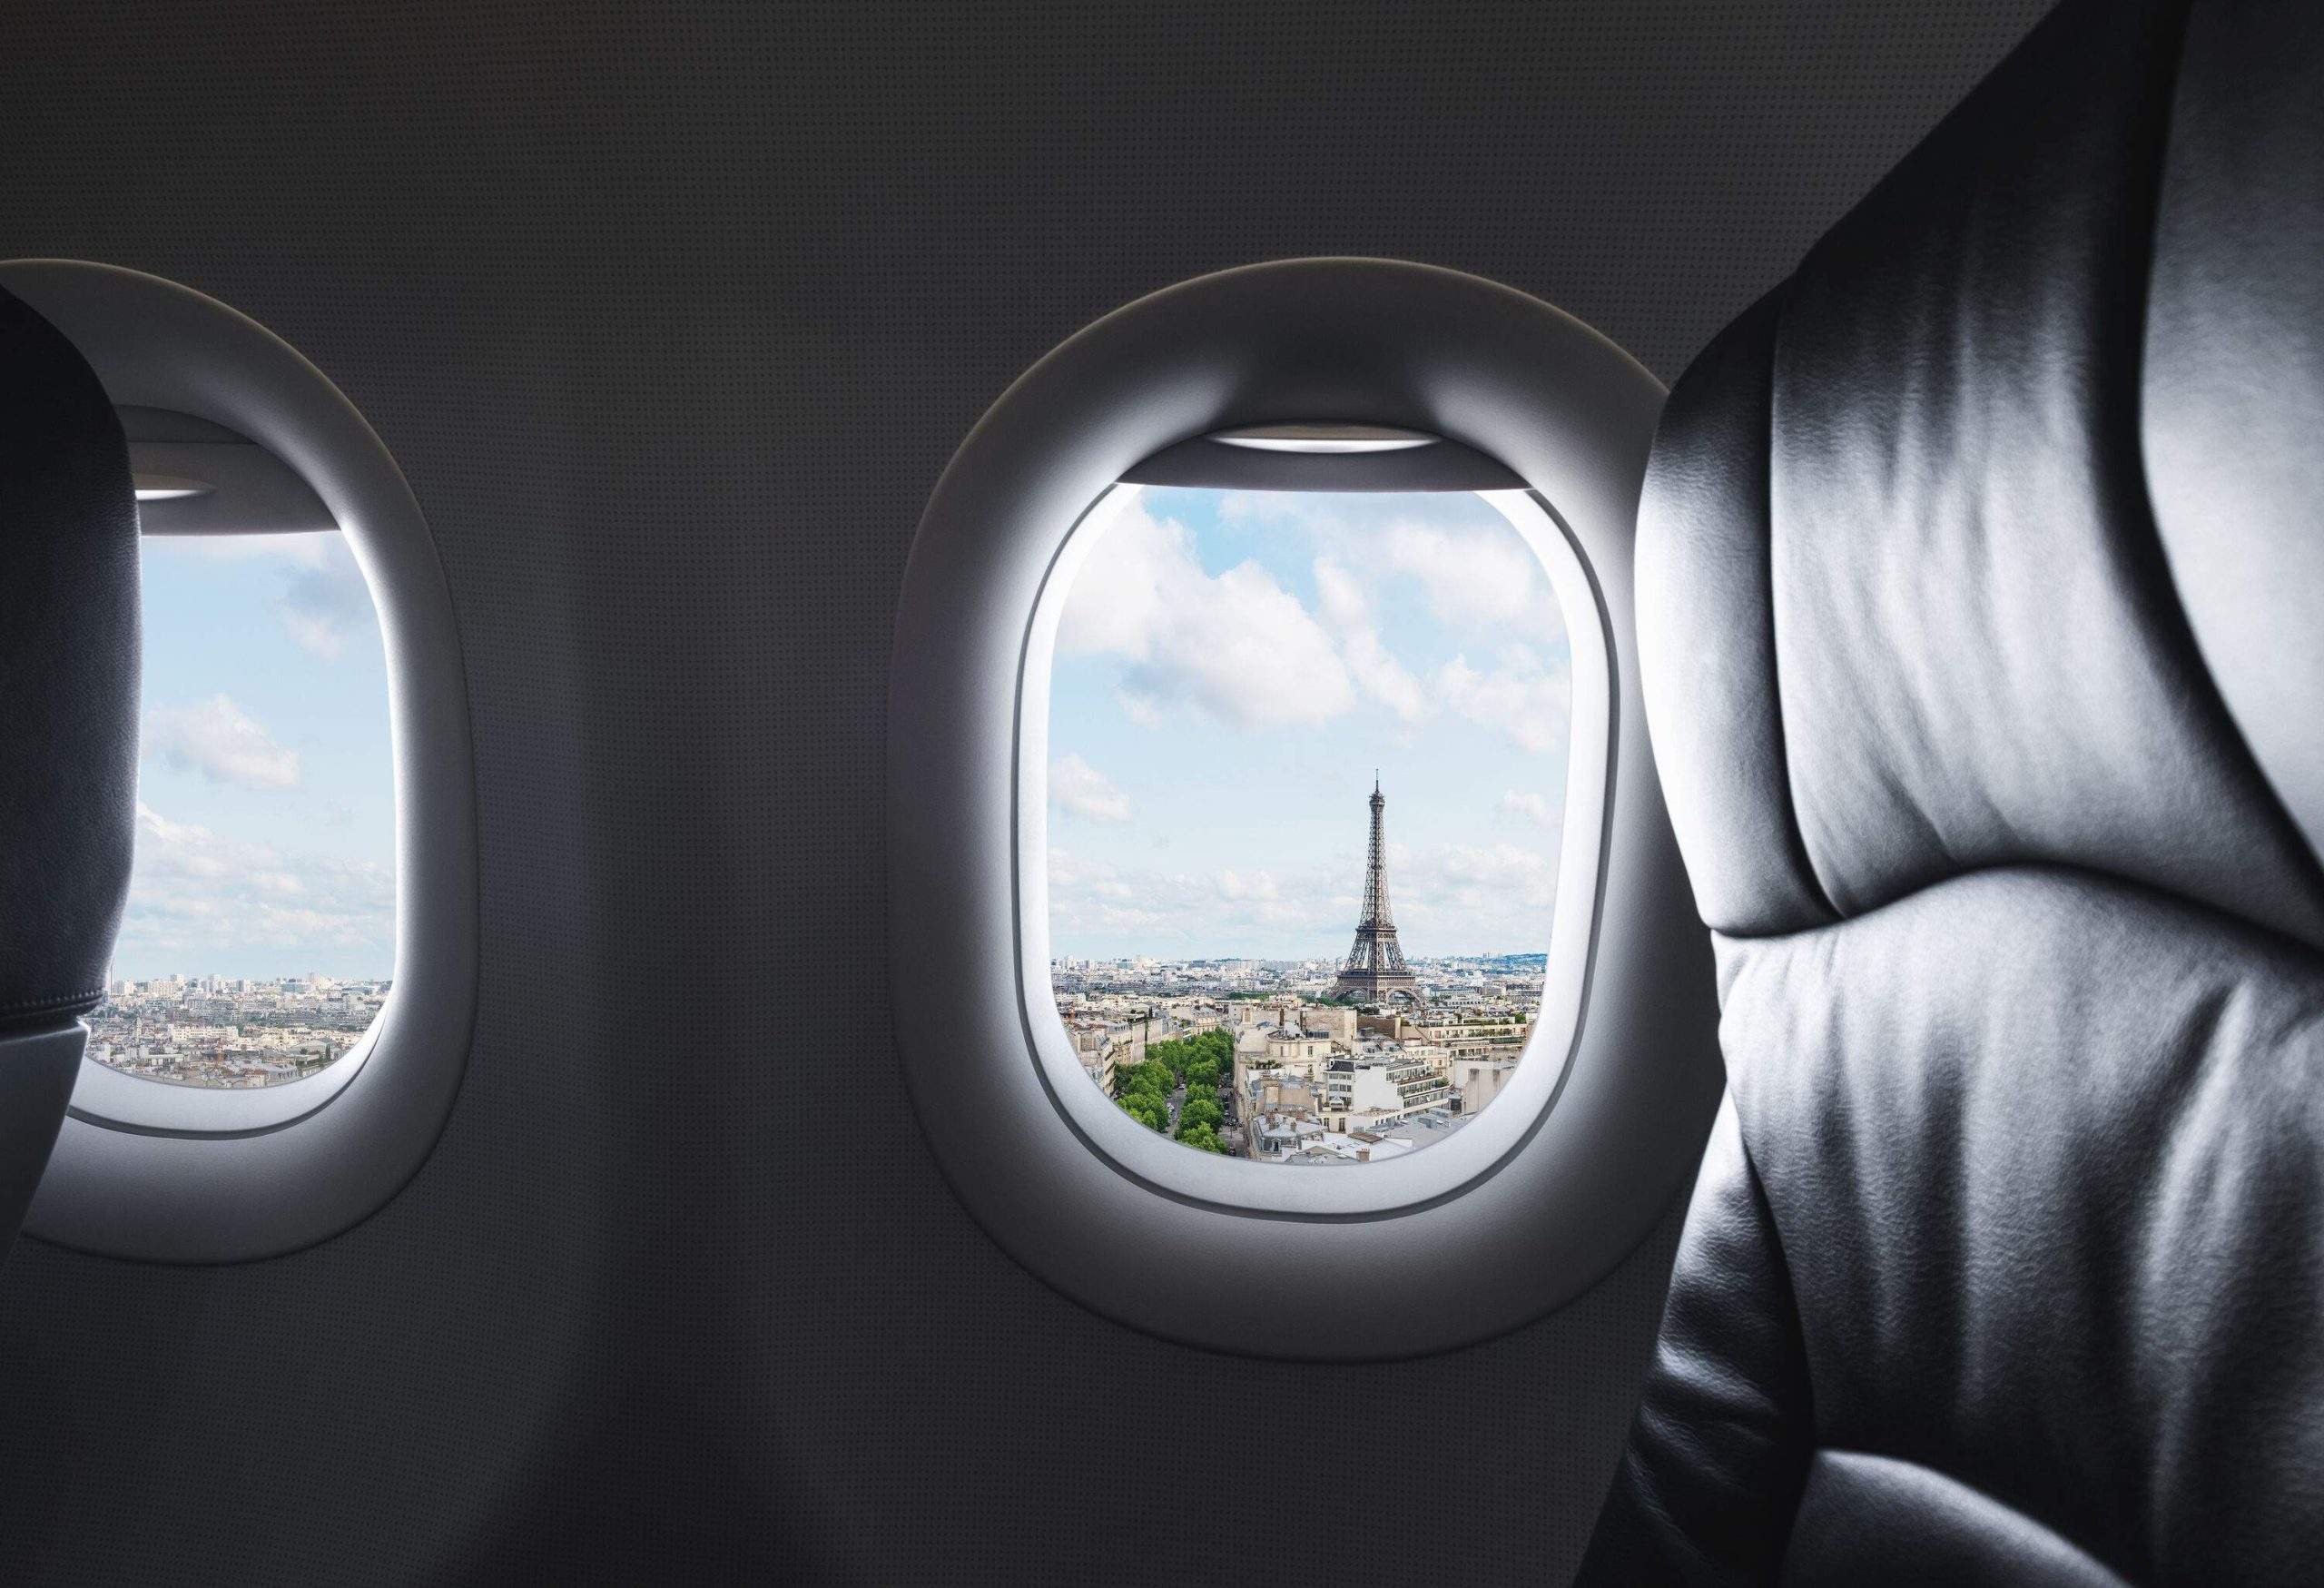 The famous Eiffel Tower is viewed through the window of an airplane.